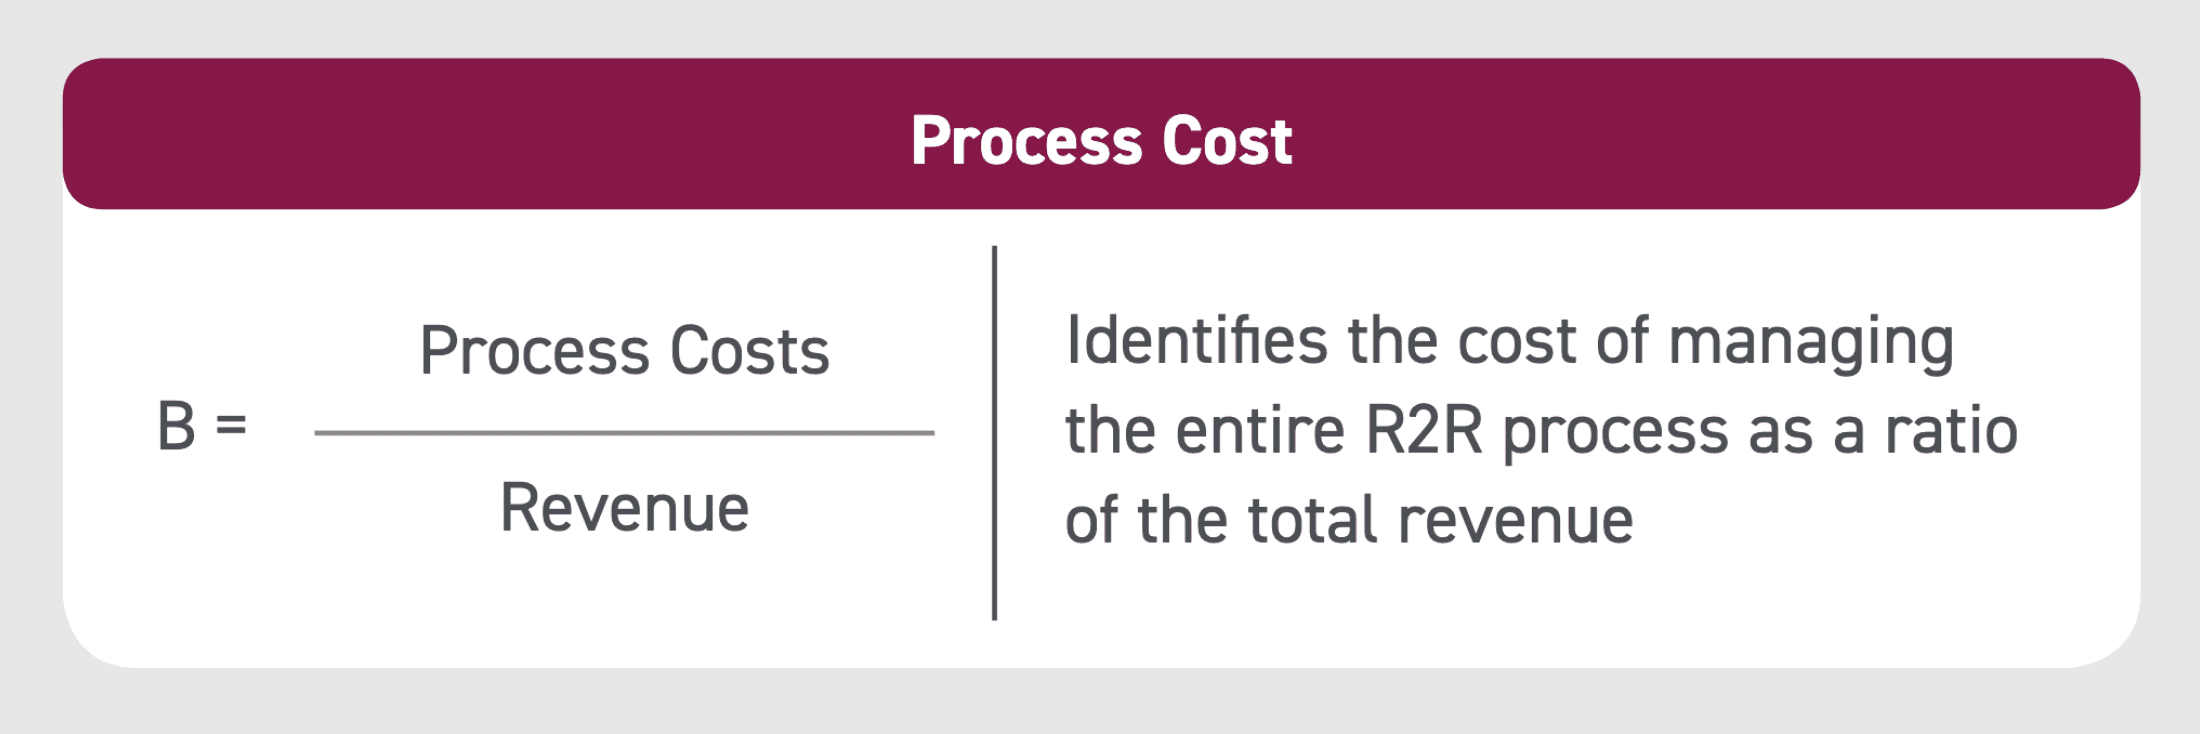 KPI finance and accounting process cost